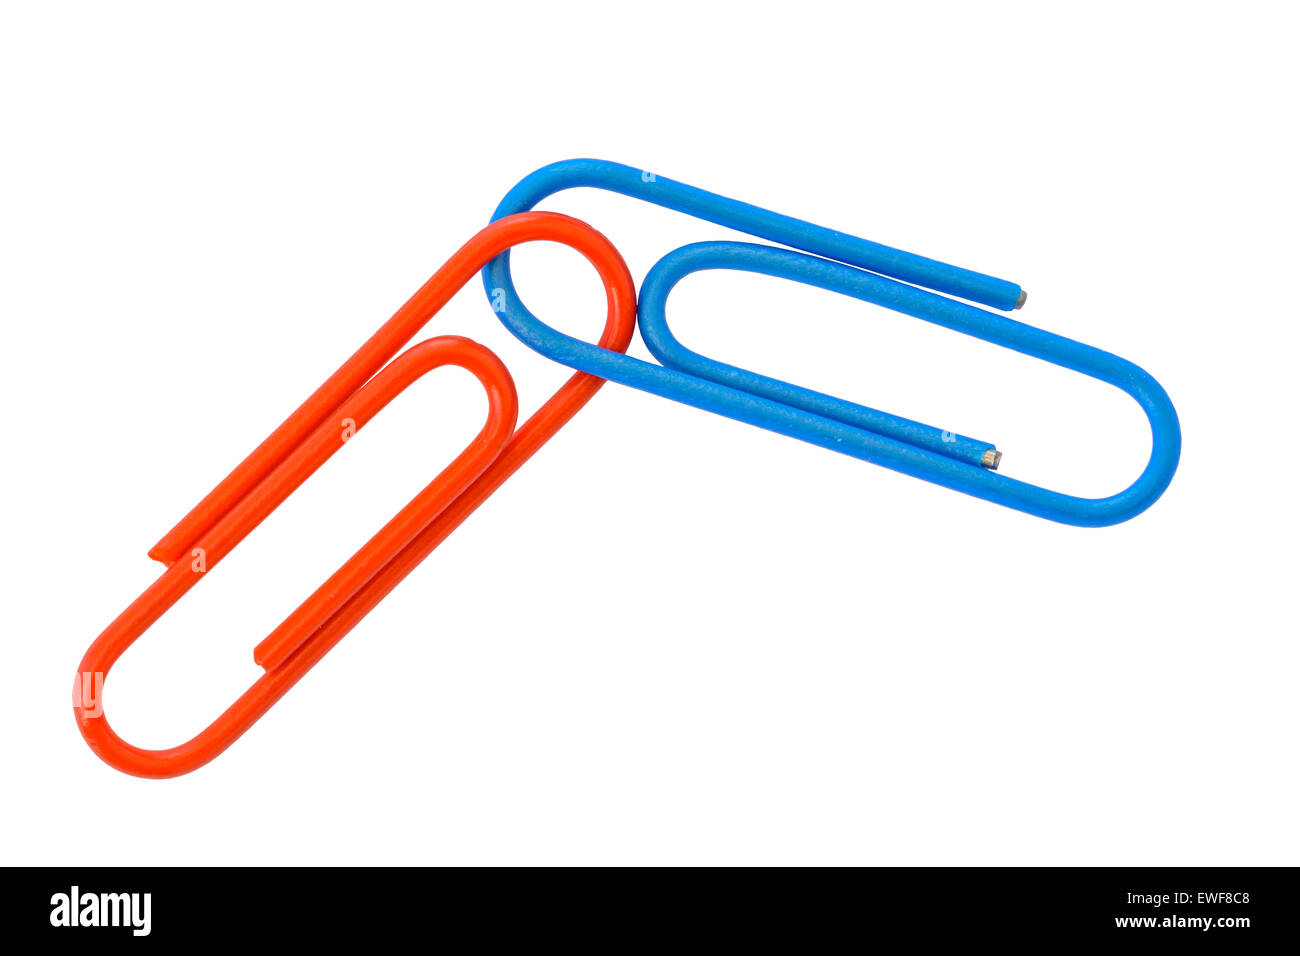 Link concept. Red and blue paperclips linked on a white background. Stock Photo